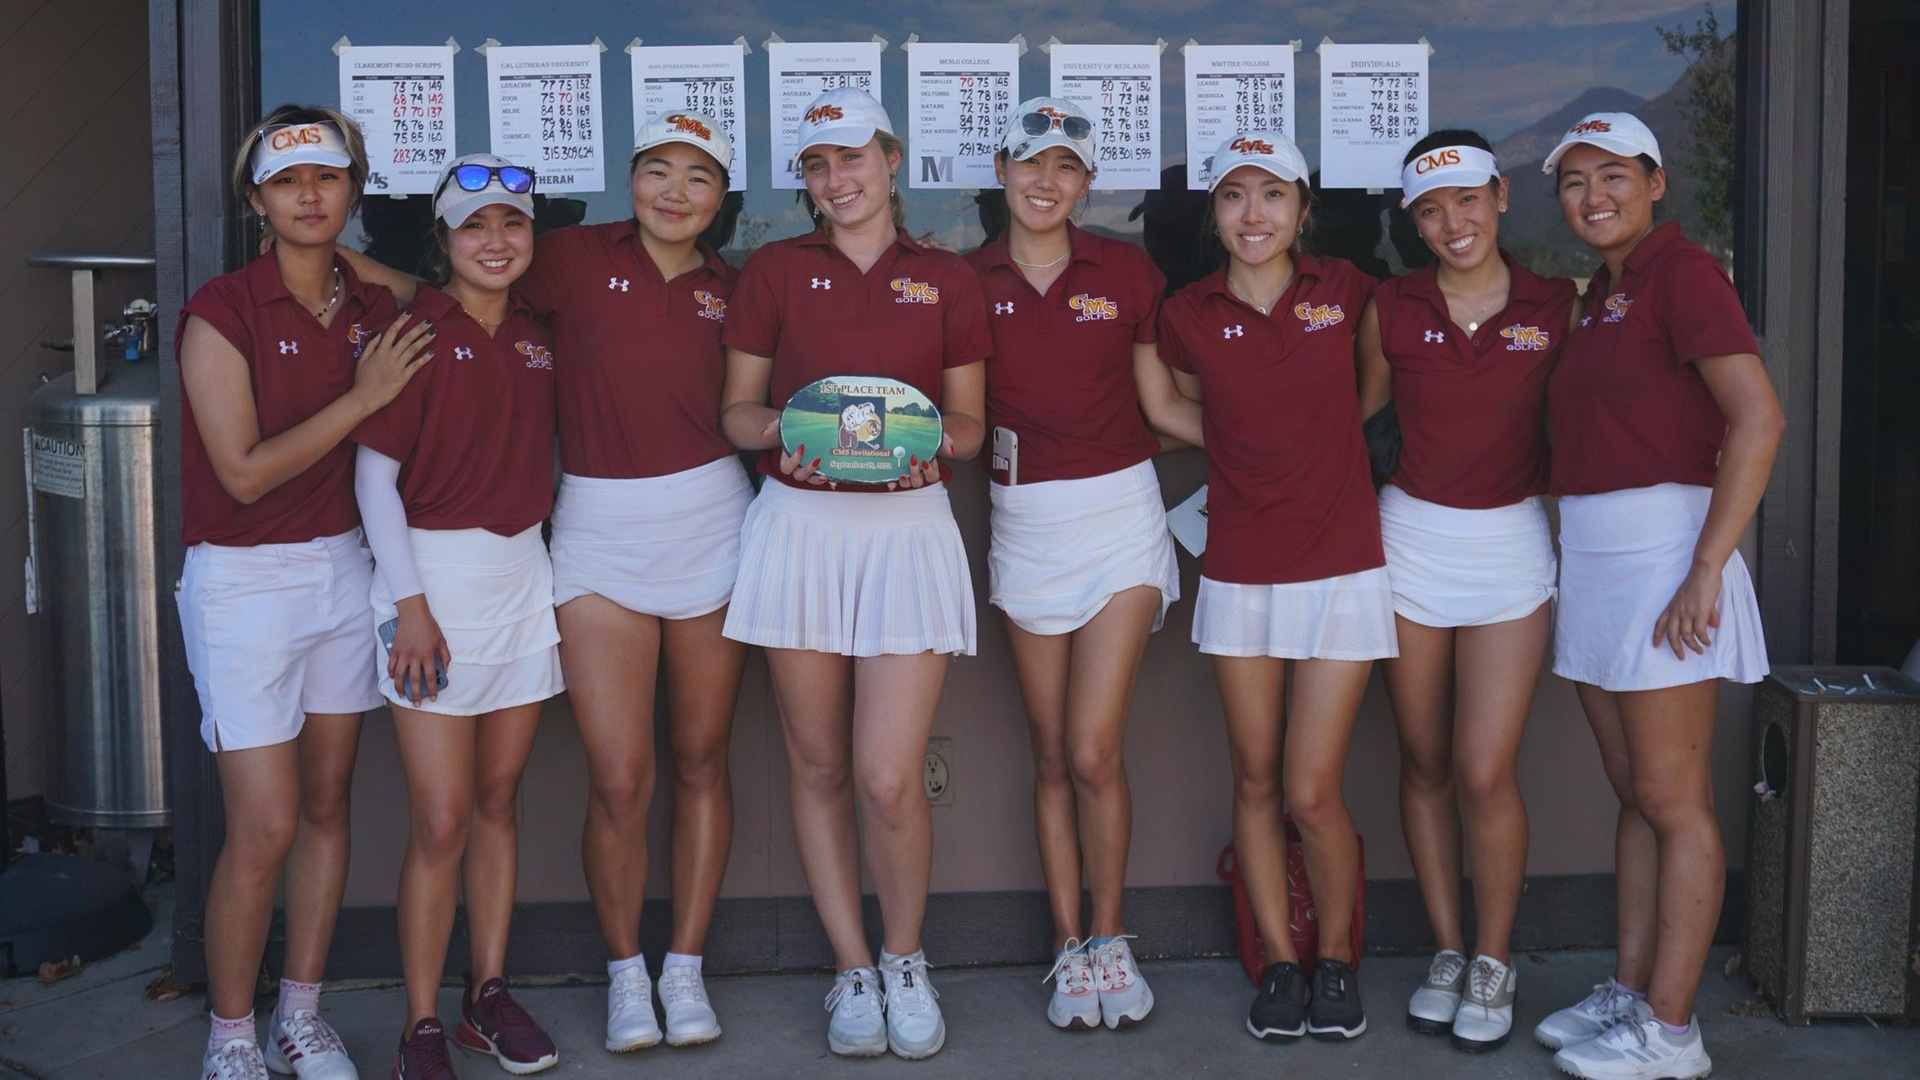 The Athenas earned first place by 12 strokes (photo by Keilee Bessho)